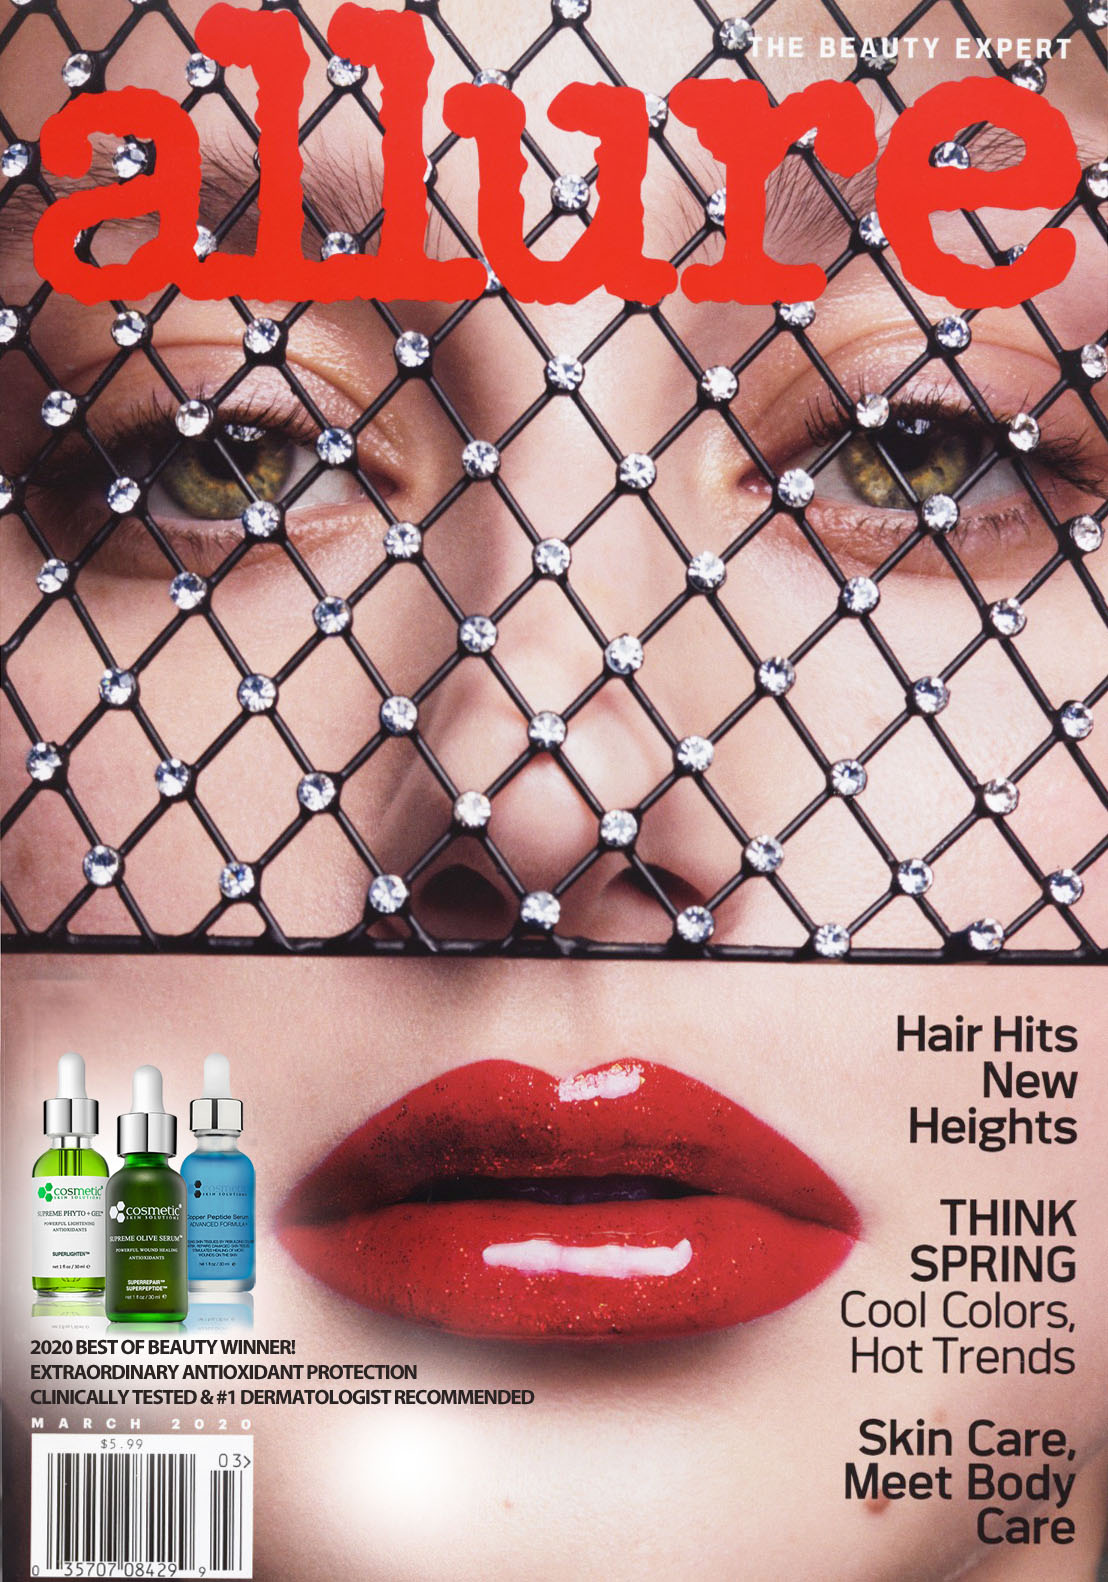 Allure Magazine Spring 2020 with Cosmetic Skin Solutions on Front